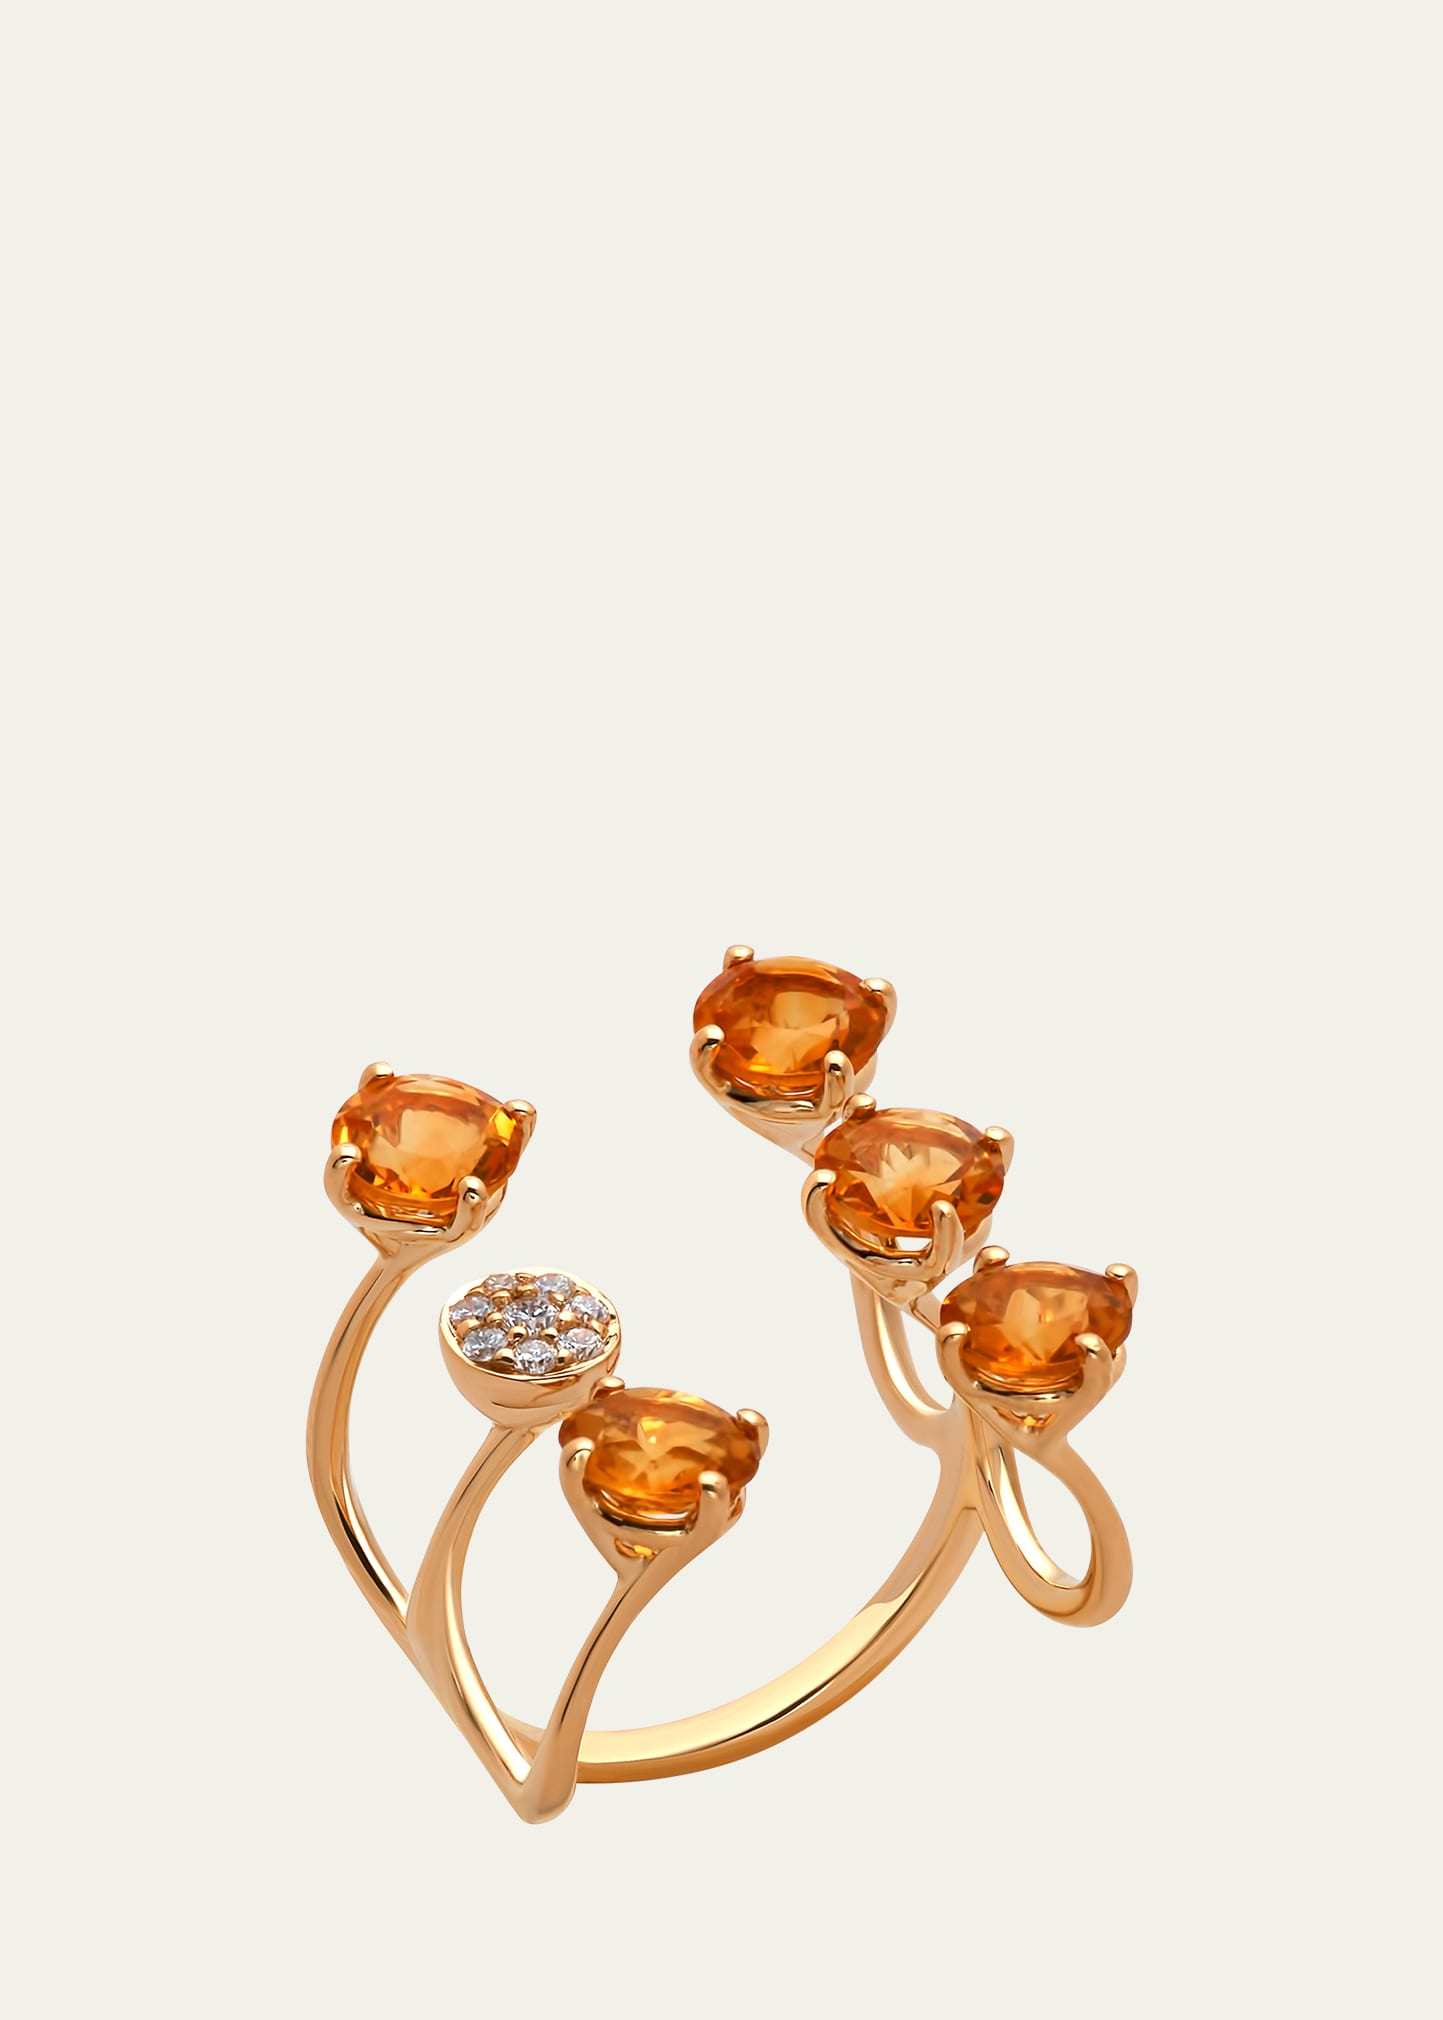 Yellow Gold Citrine Ring from The Aurore Collection, Size 7